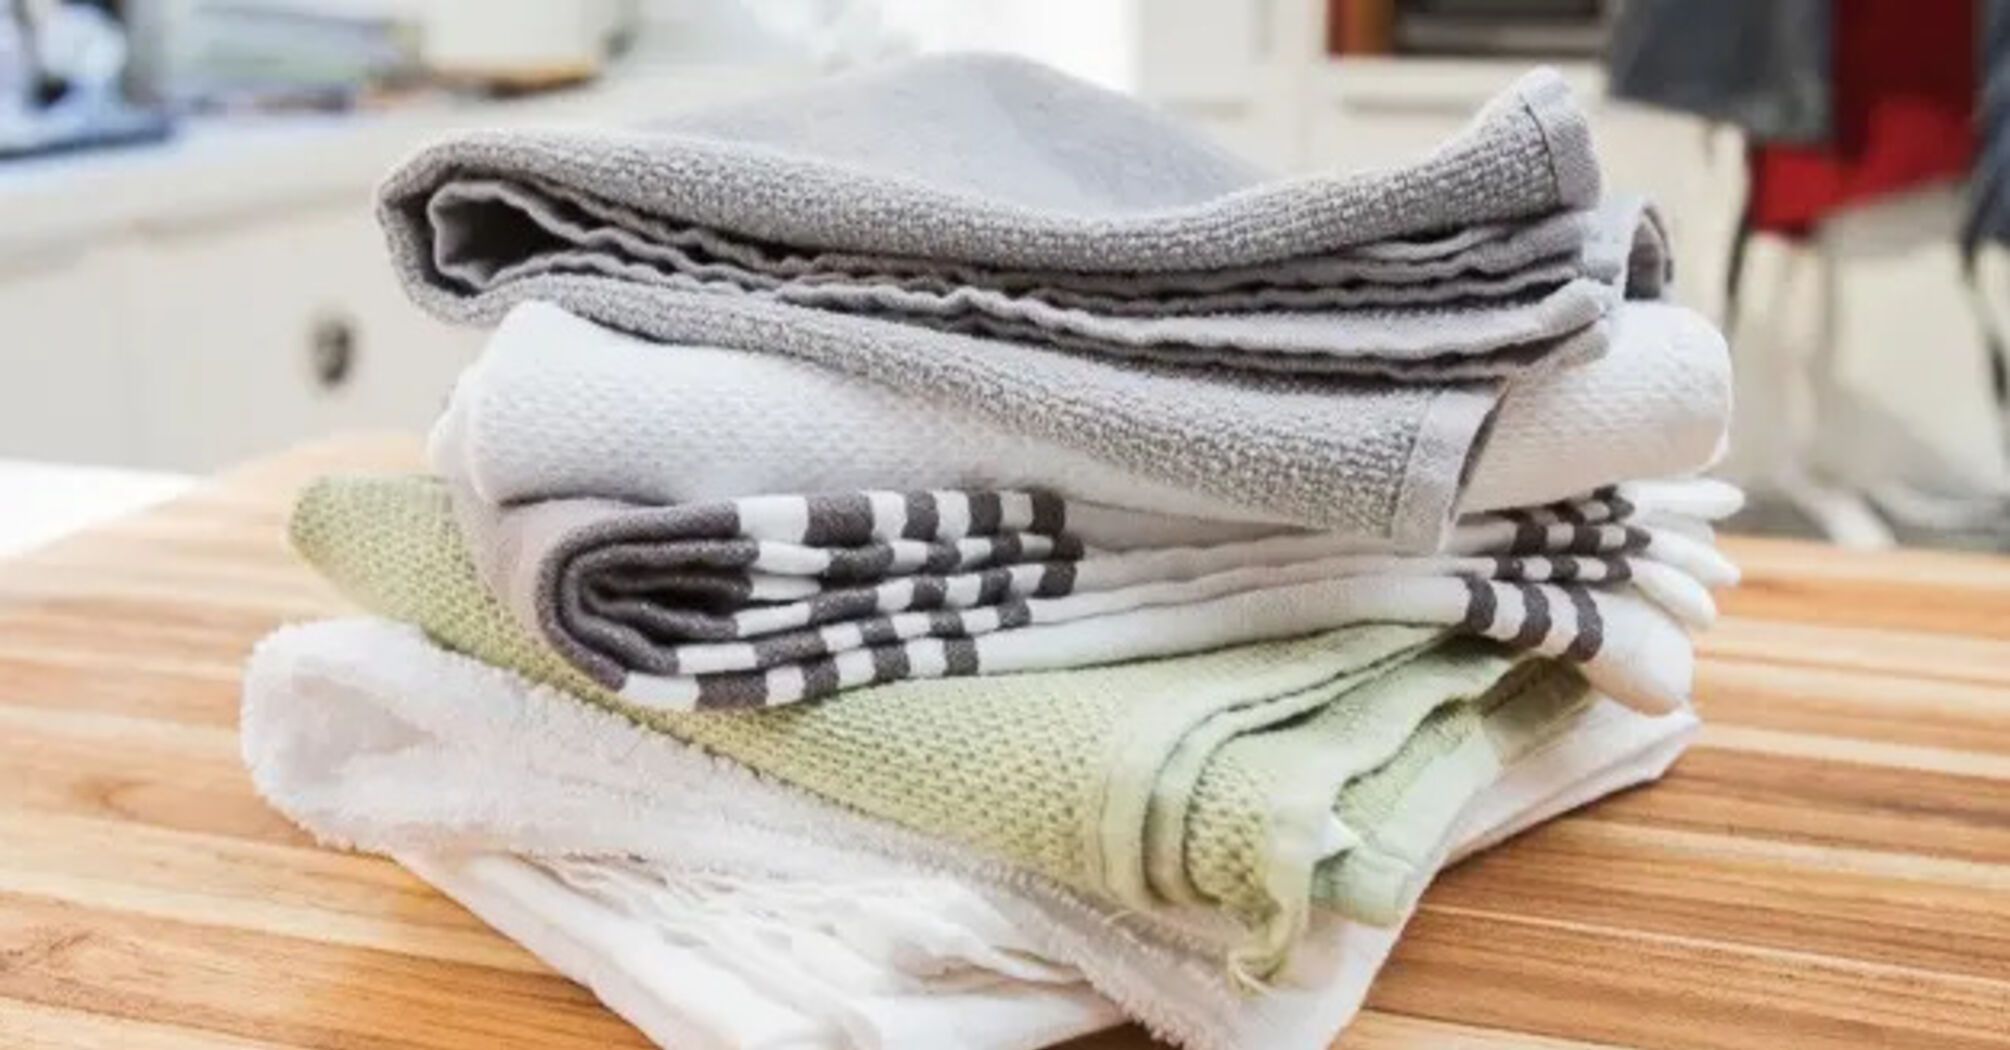 How to remove old stains from kitchen towels